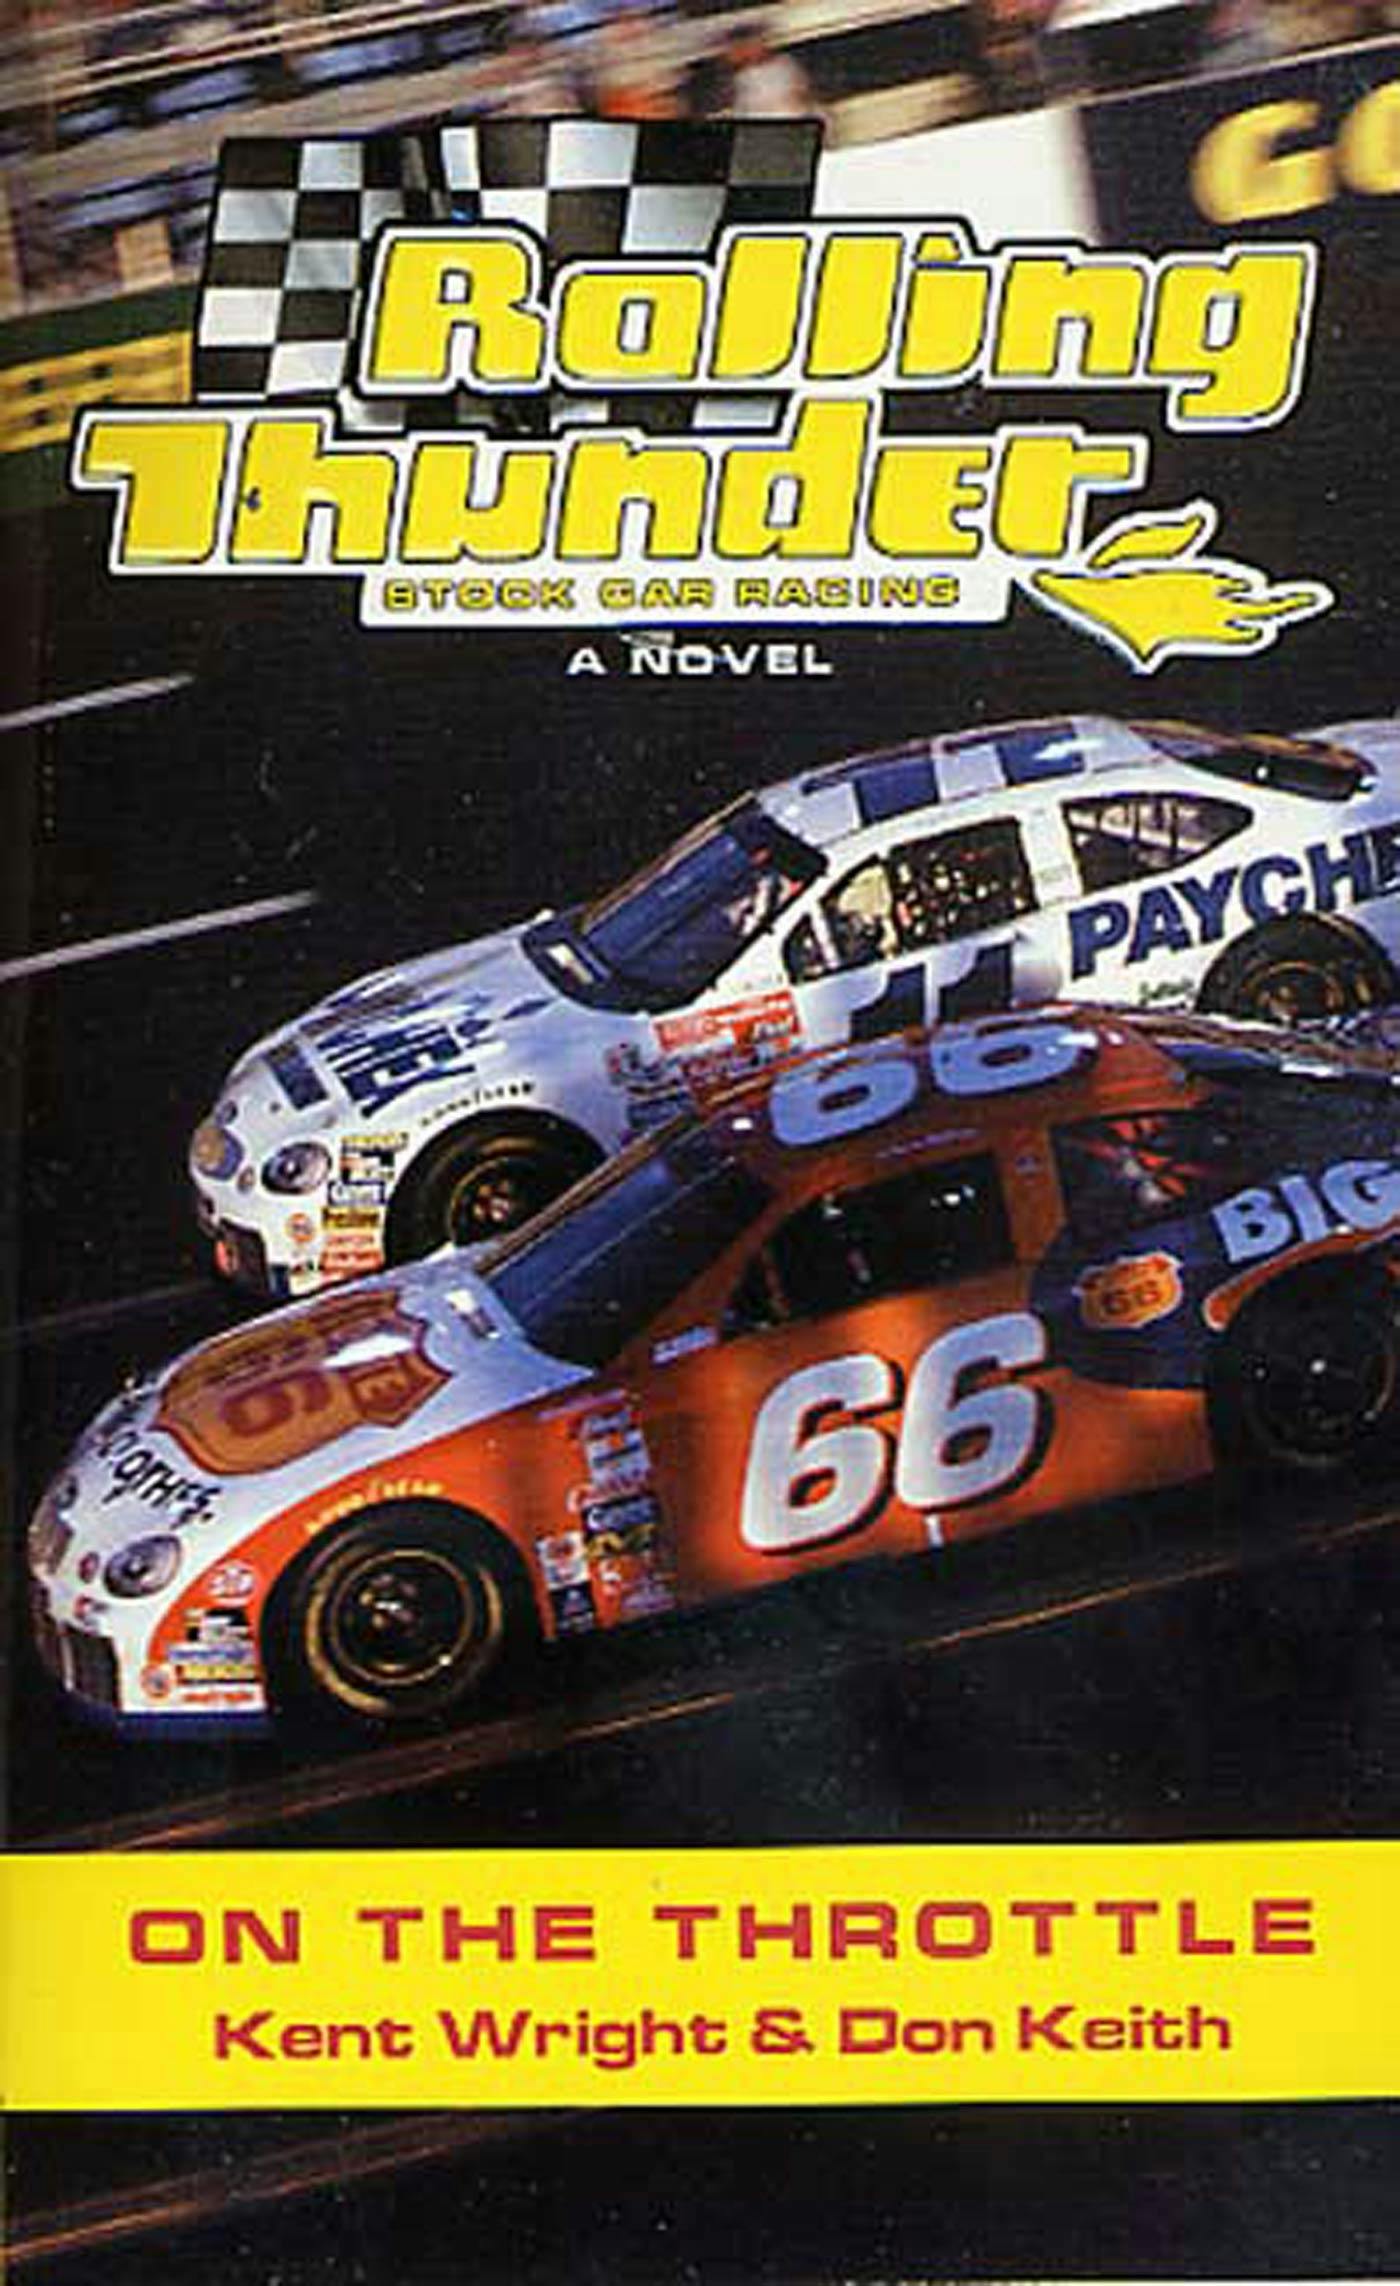 Cover for the book titled as: Rolling Thunder Stock Car Racing: On The Throttle